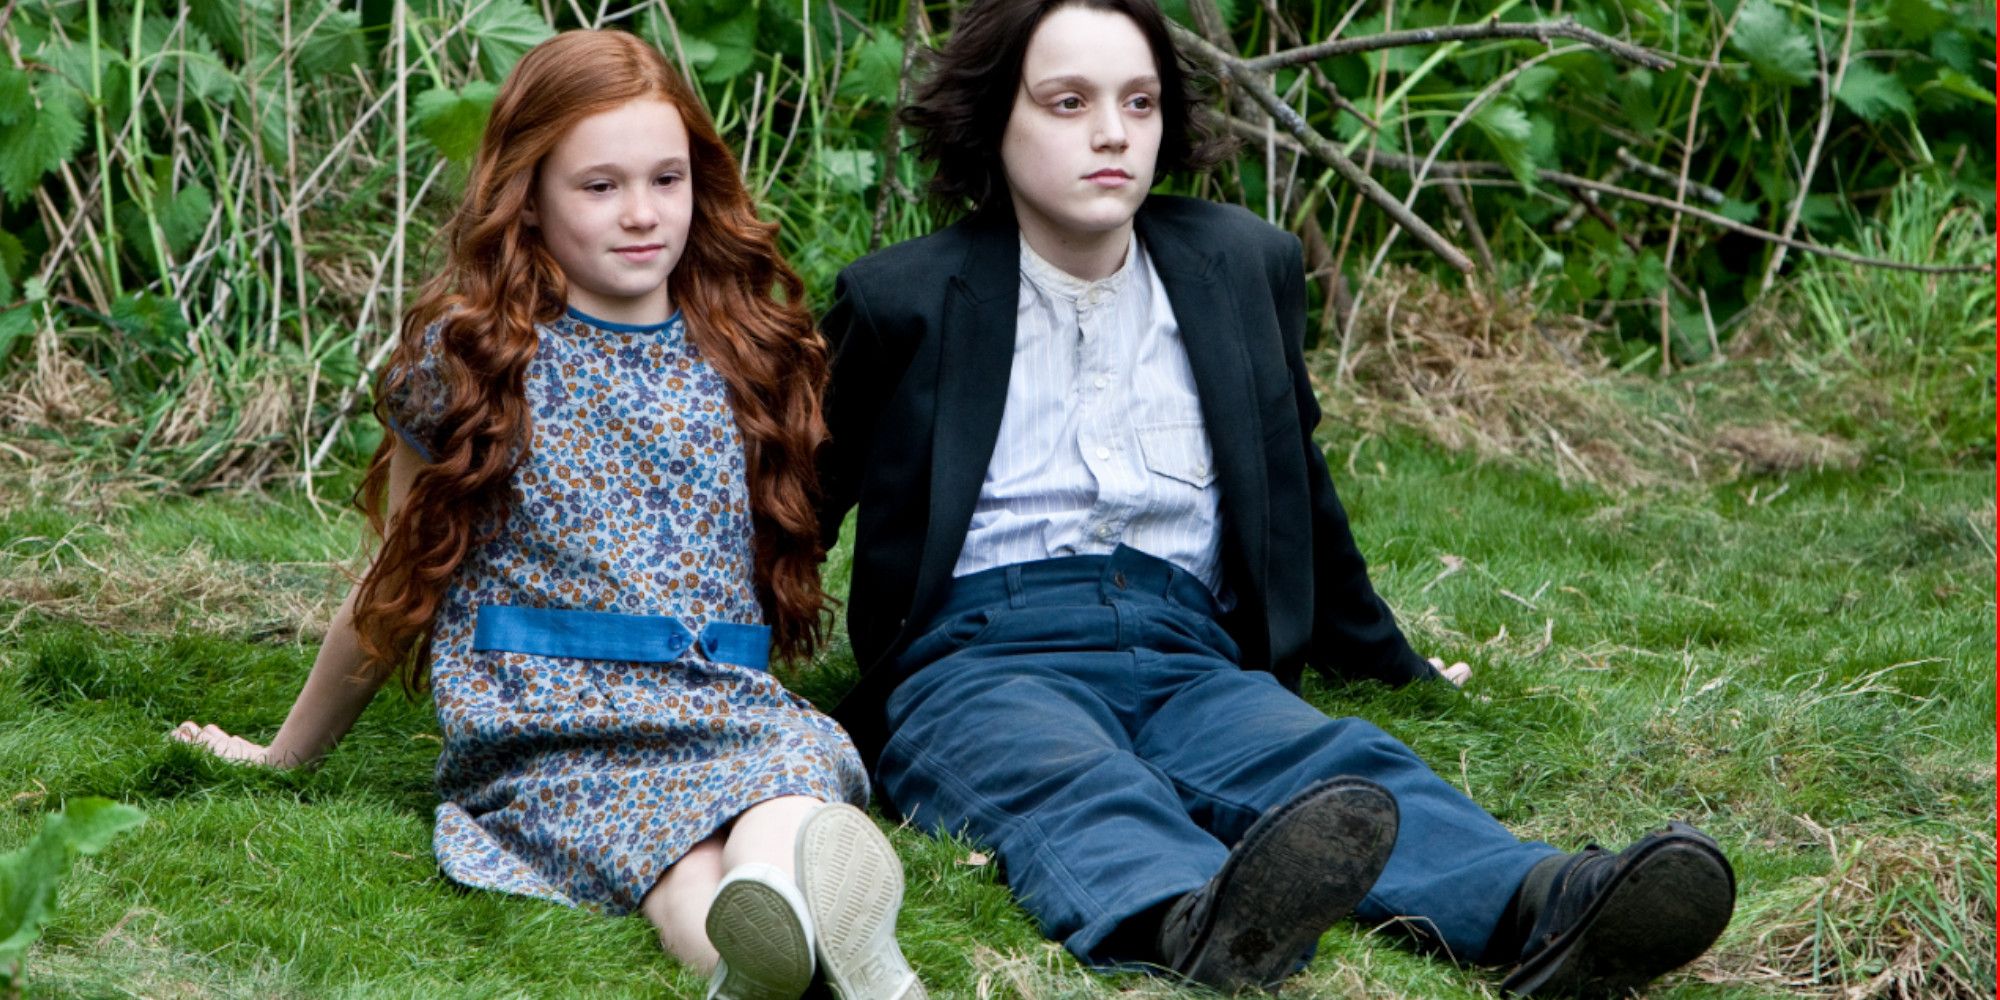 Younger iterations of Lily Evans and Severus Snape in Harry Potter. 